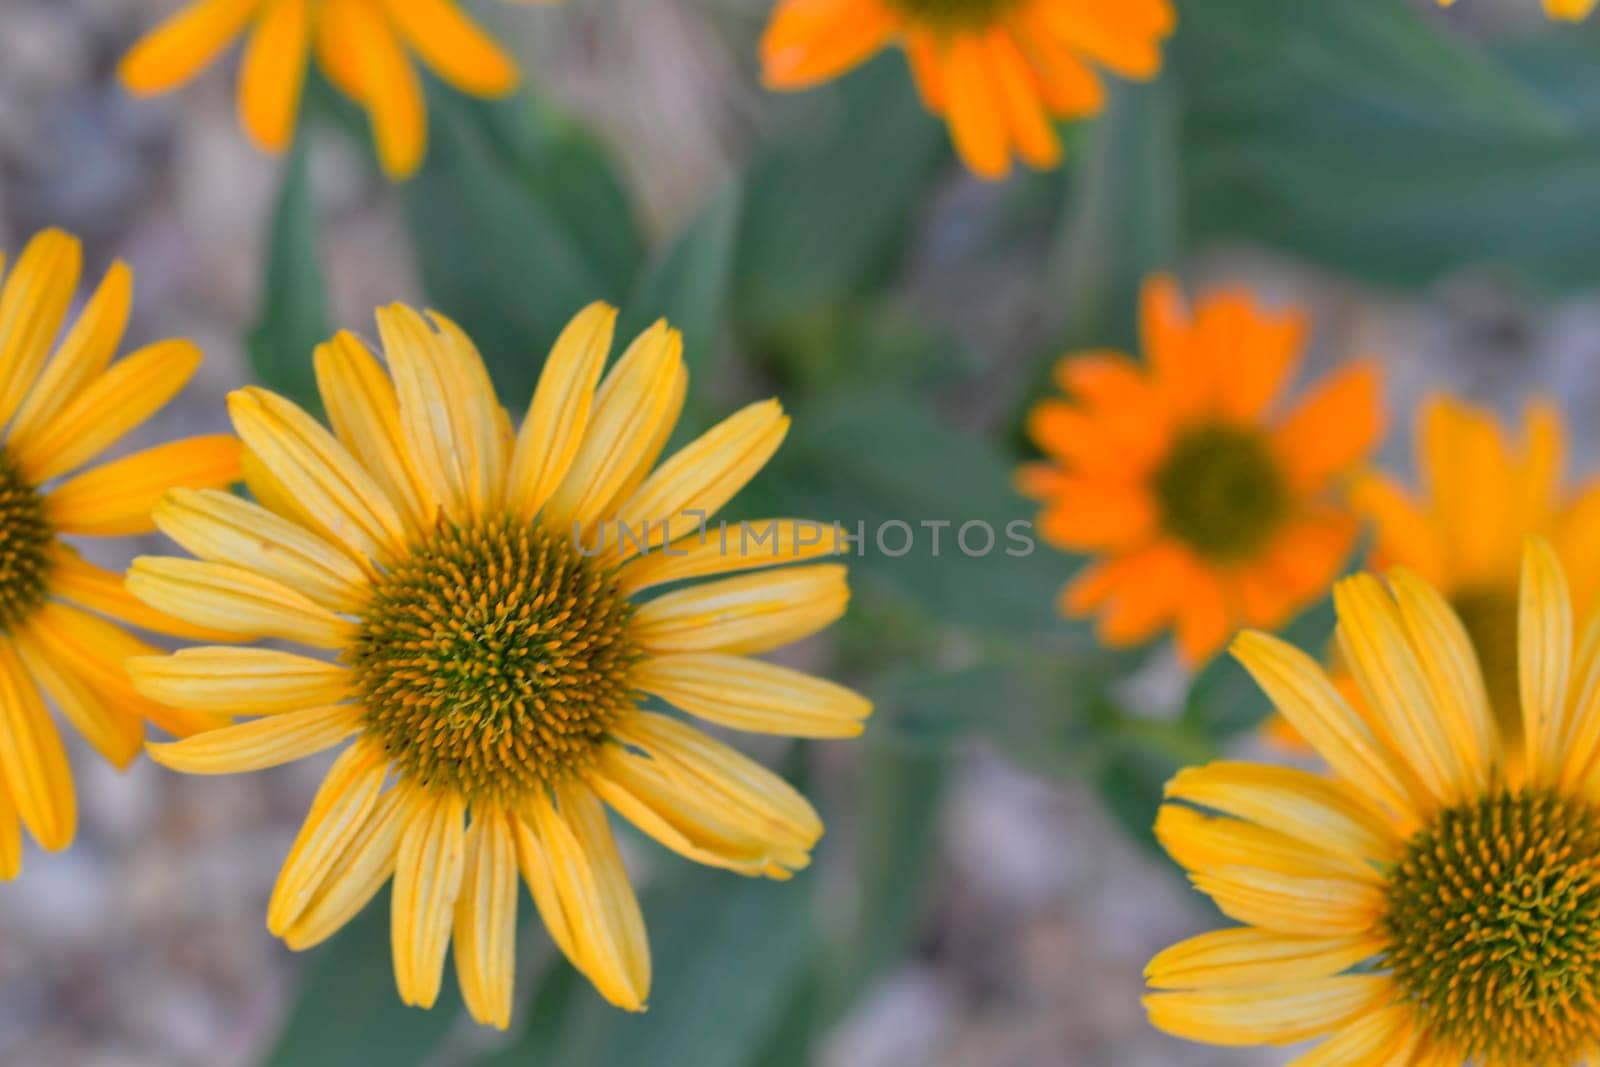 The family Asteraceae with the original name Compositae. Commonly referred to as the aster, daisy, composite, or sunflower family. Asteraceae consists of over 32,000 known species of flowering plants in over 1,900 genera within the order Asterales by roman_nerud